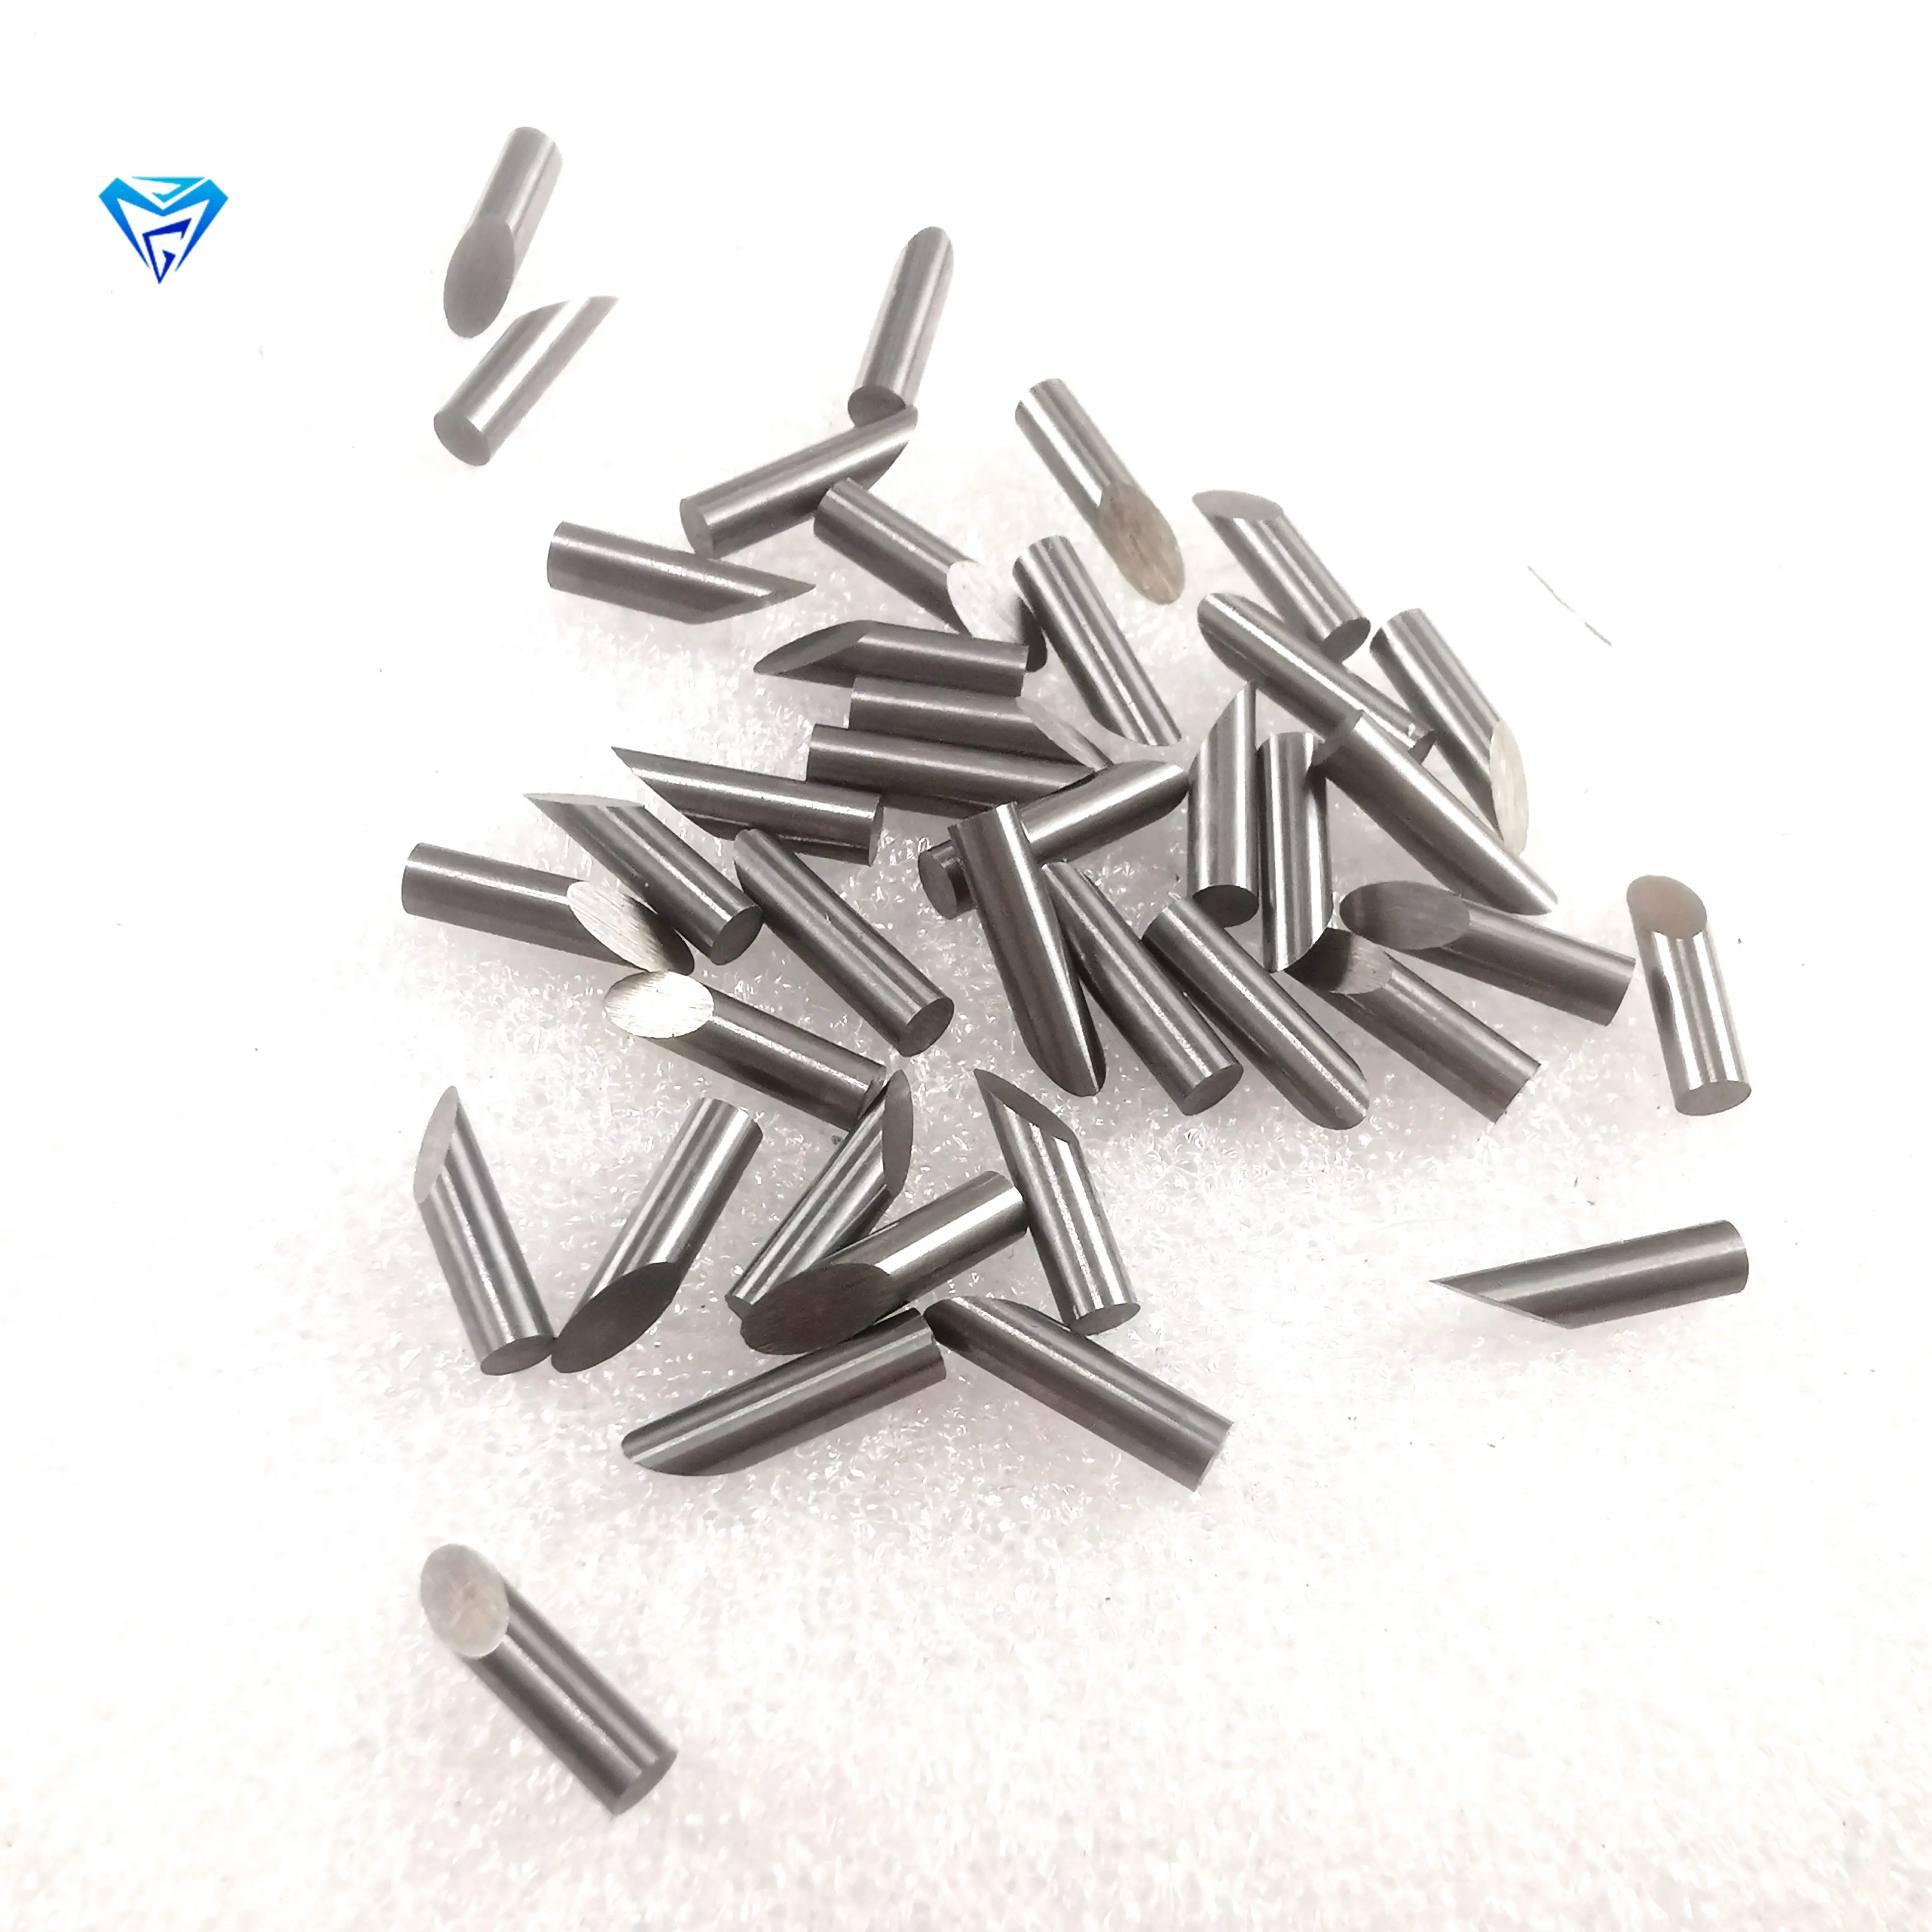 Customized cemented carbide rods small tungsten carbide piece for marking and scribing steel, ceramic and glass